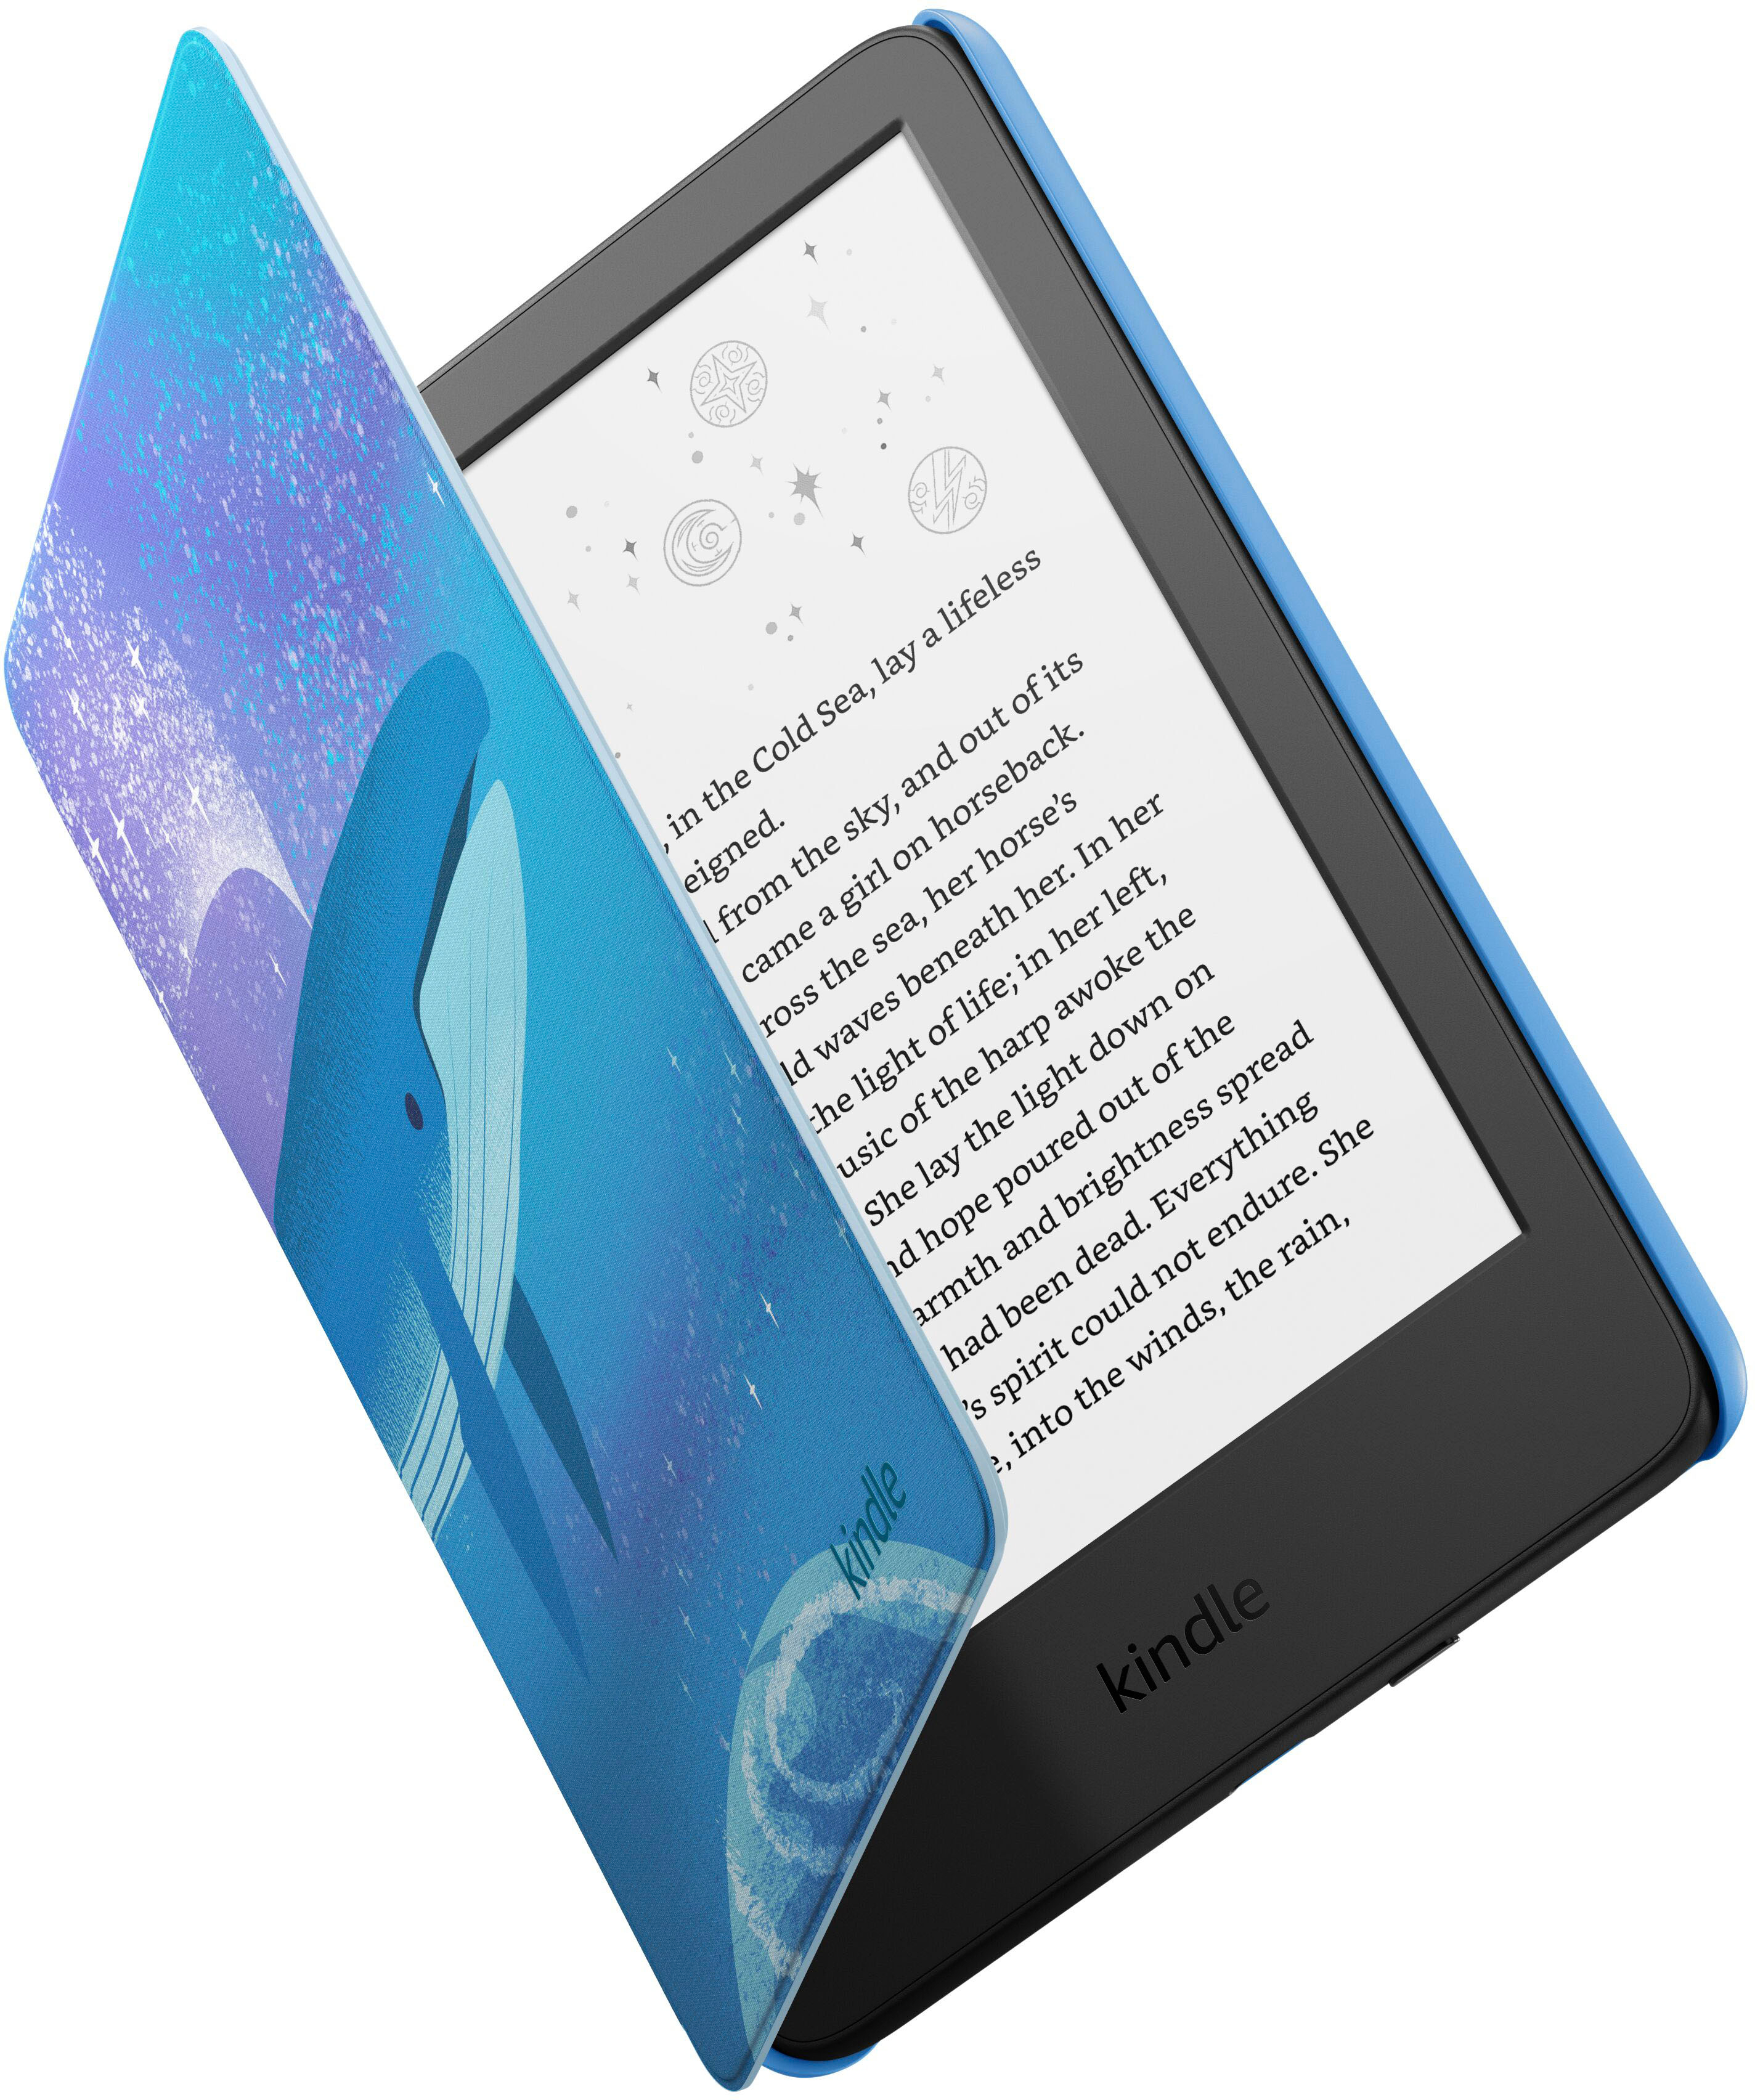 Kindle Paperwhite Kids review: A tech gift for little bookworms